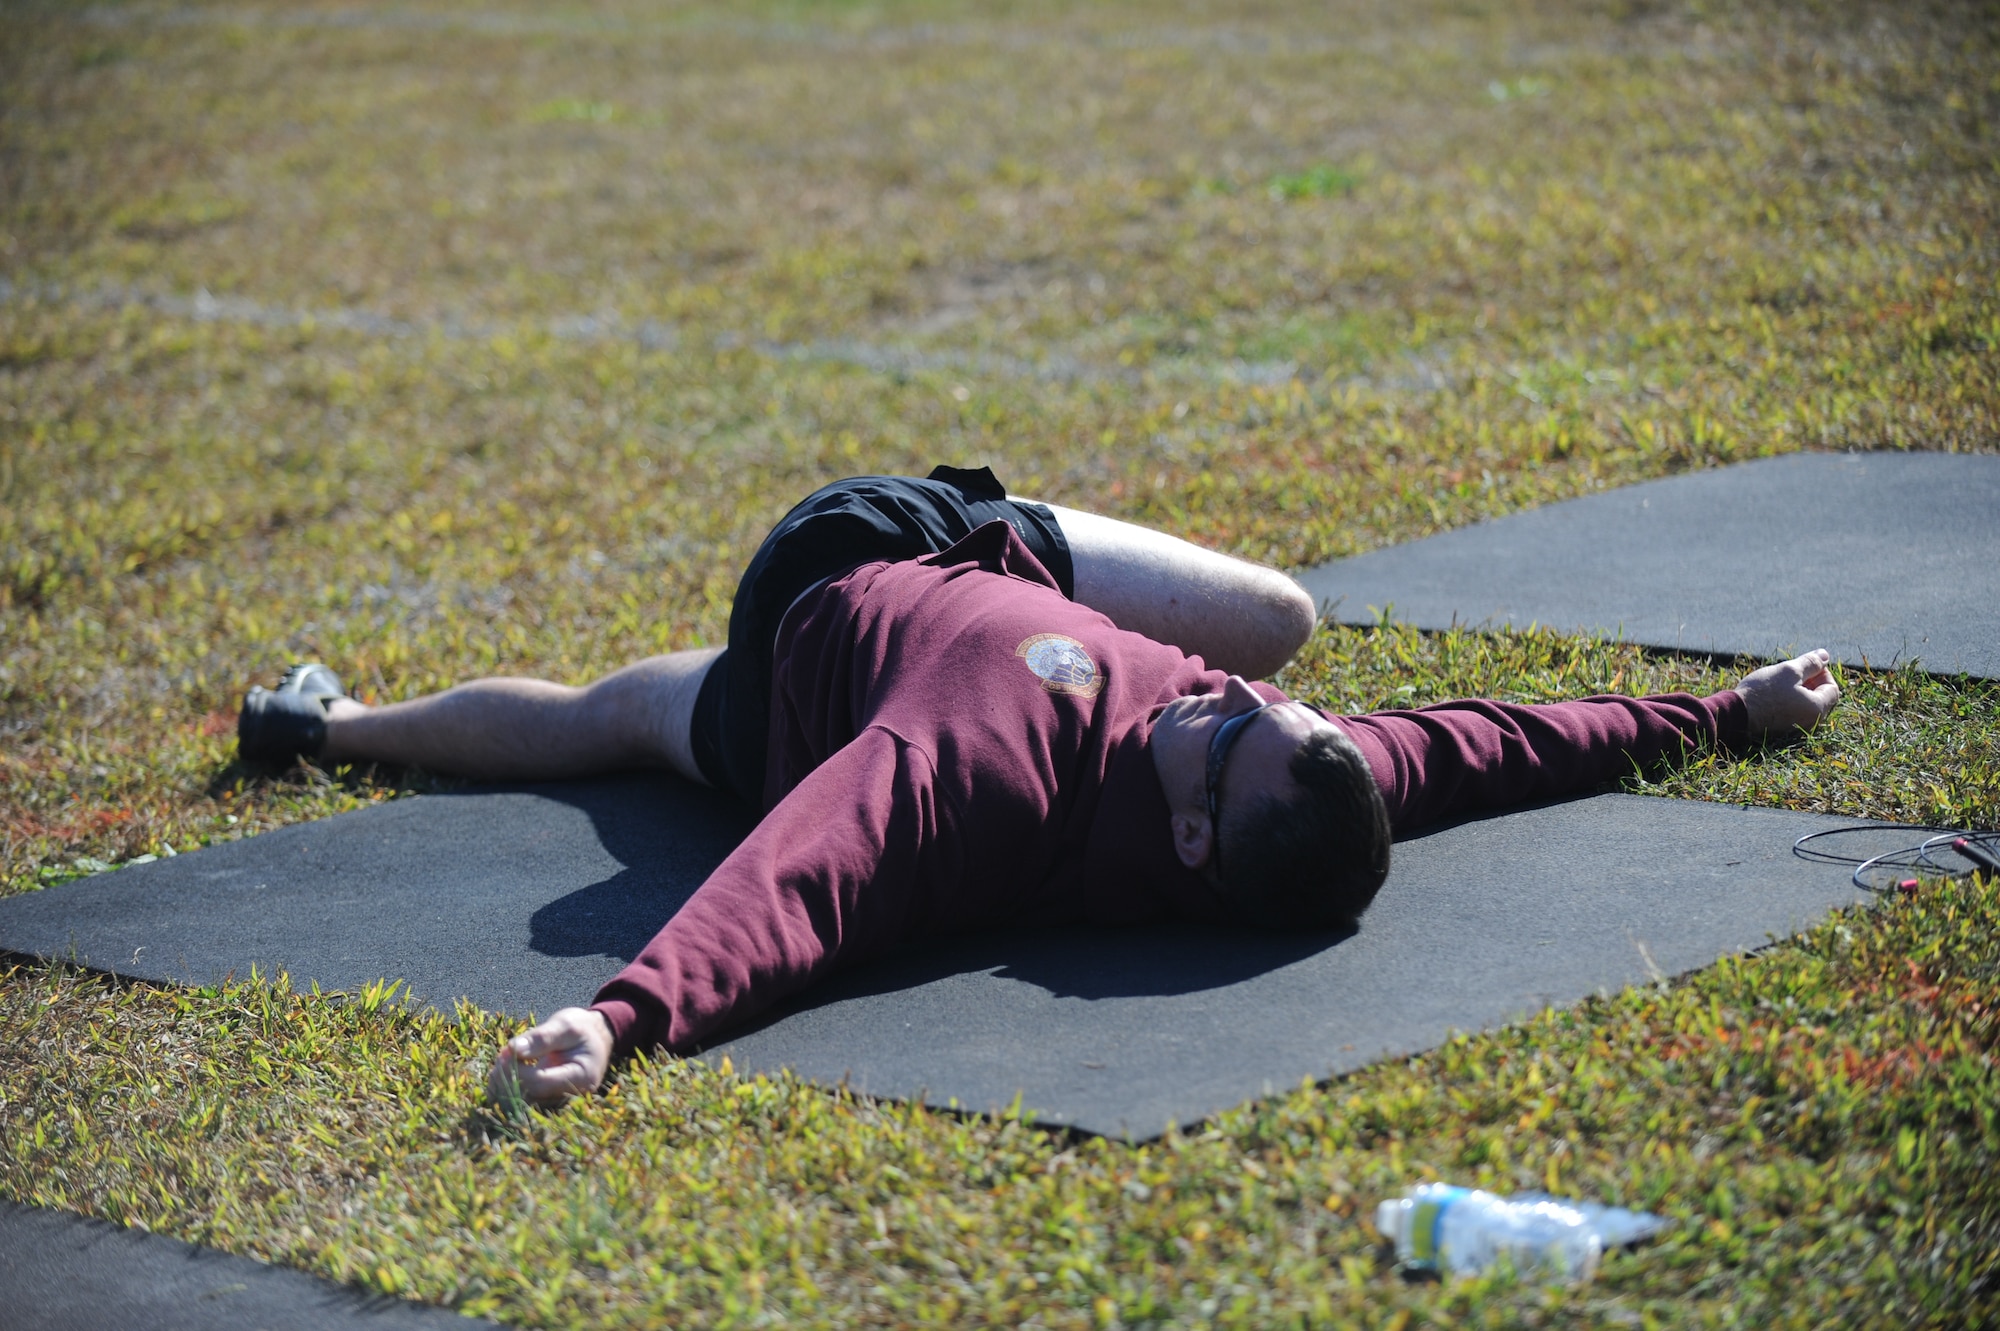 Tech. Sgt. Clayton Morris, 436th Operations Support Squadron Air Crew Flight Equipment NCO in charge of technician training, stretches prior to the start of the Eastern Shore Affiliate Challenge Oct. 17, 2015, in Georgetown, Del. This was Morris’ first CrossFit competition and he competed in the men’s scaled division. (U.S. Air Force photo/Staff Sgt. Elizabeth Morris)